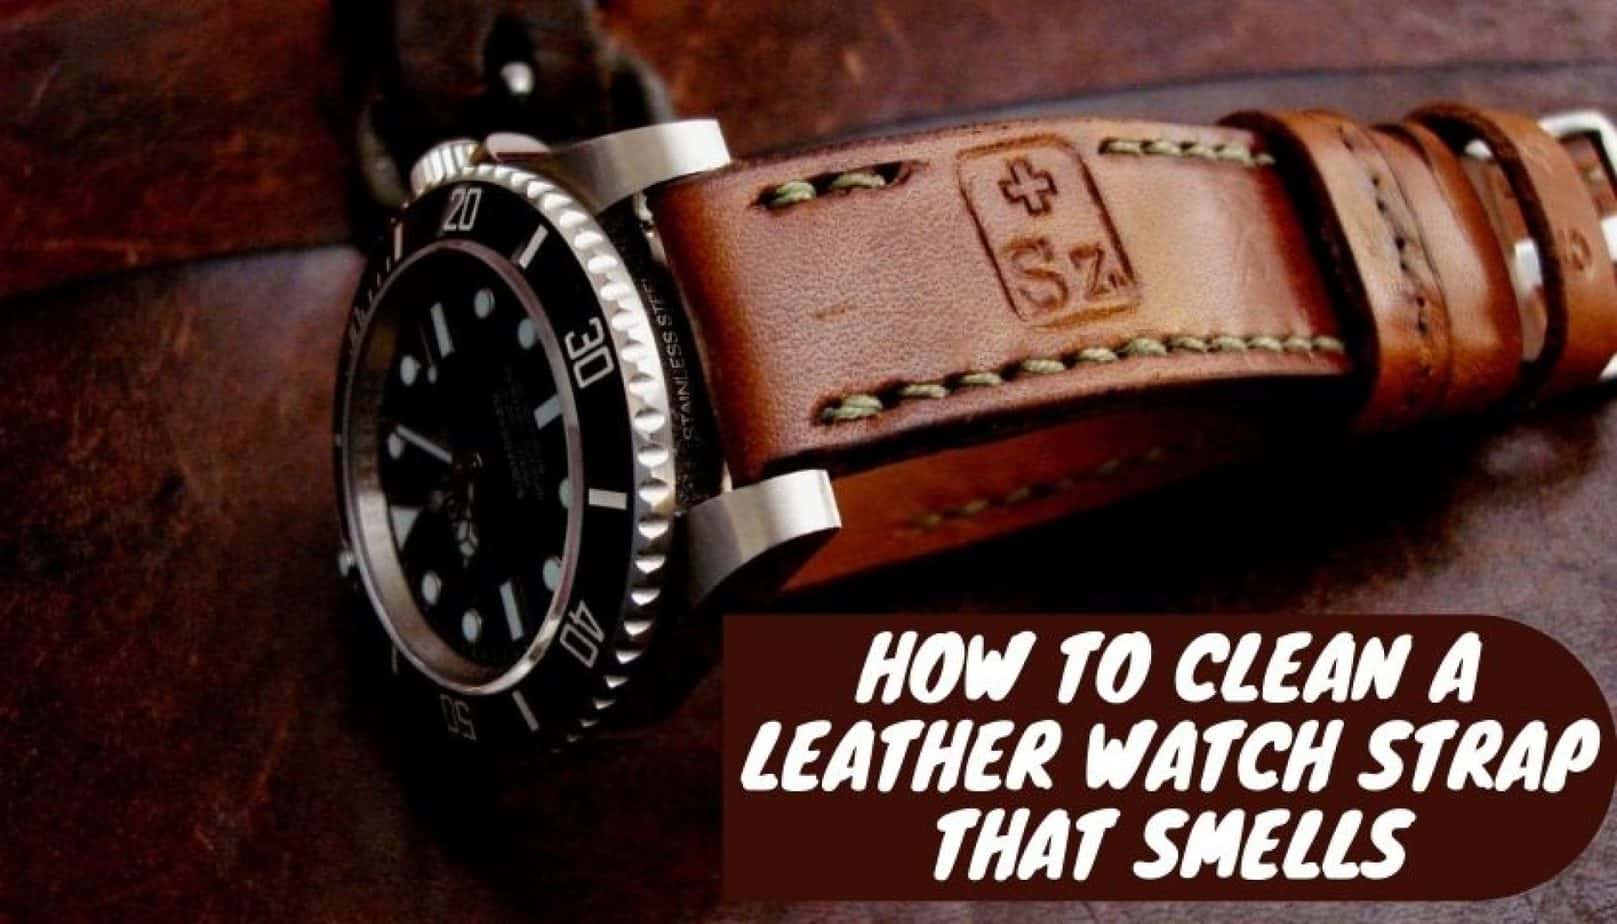 How to Clean a Leather Watch Strap that Smells | Pickedwatch